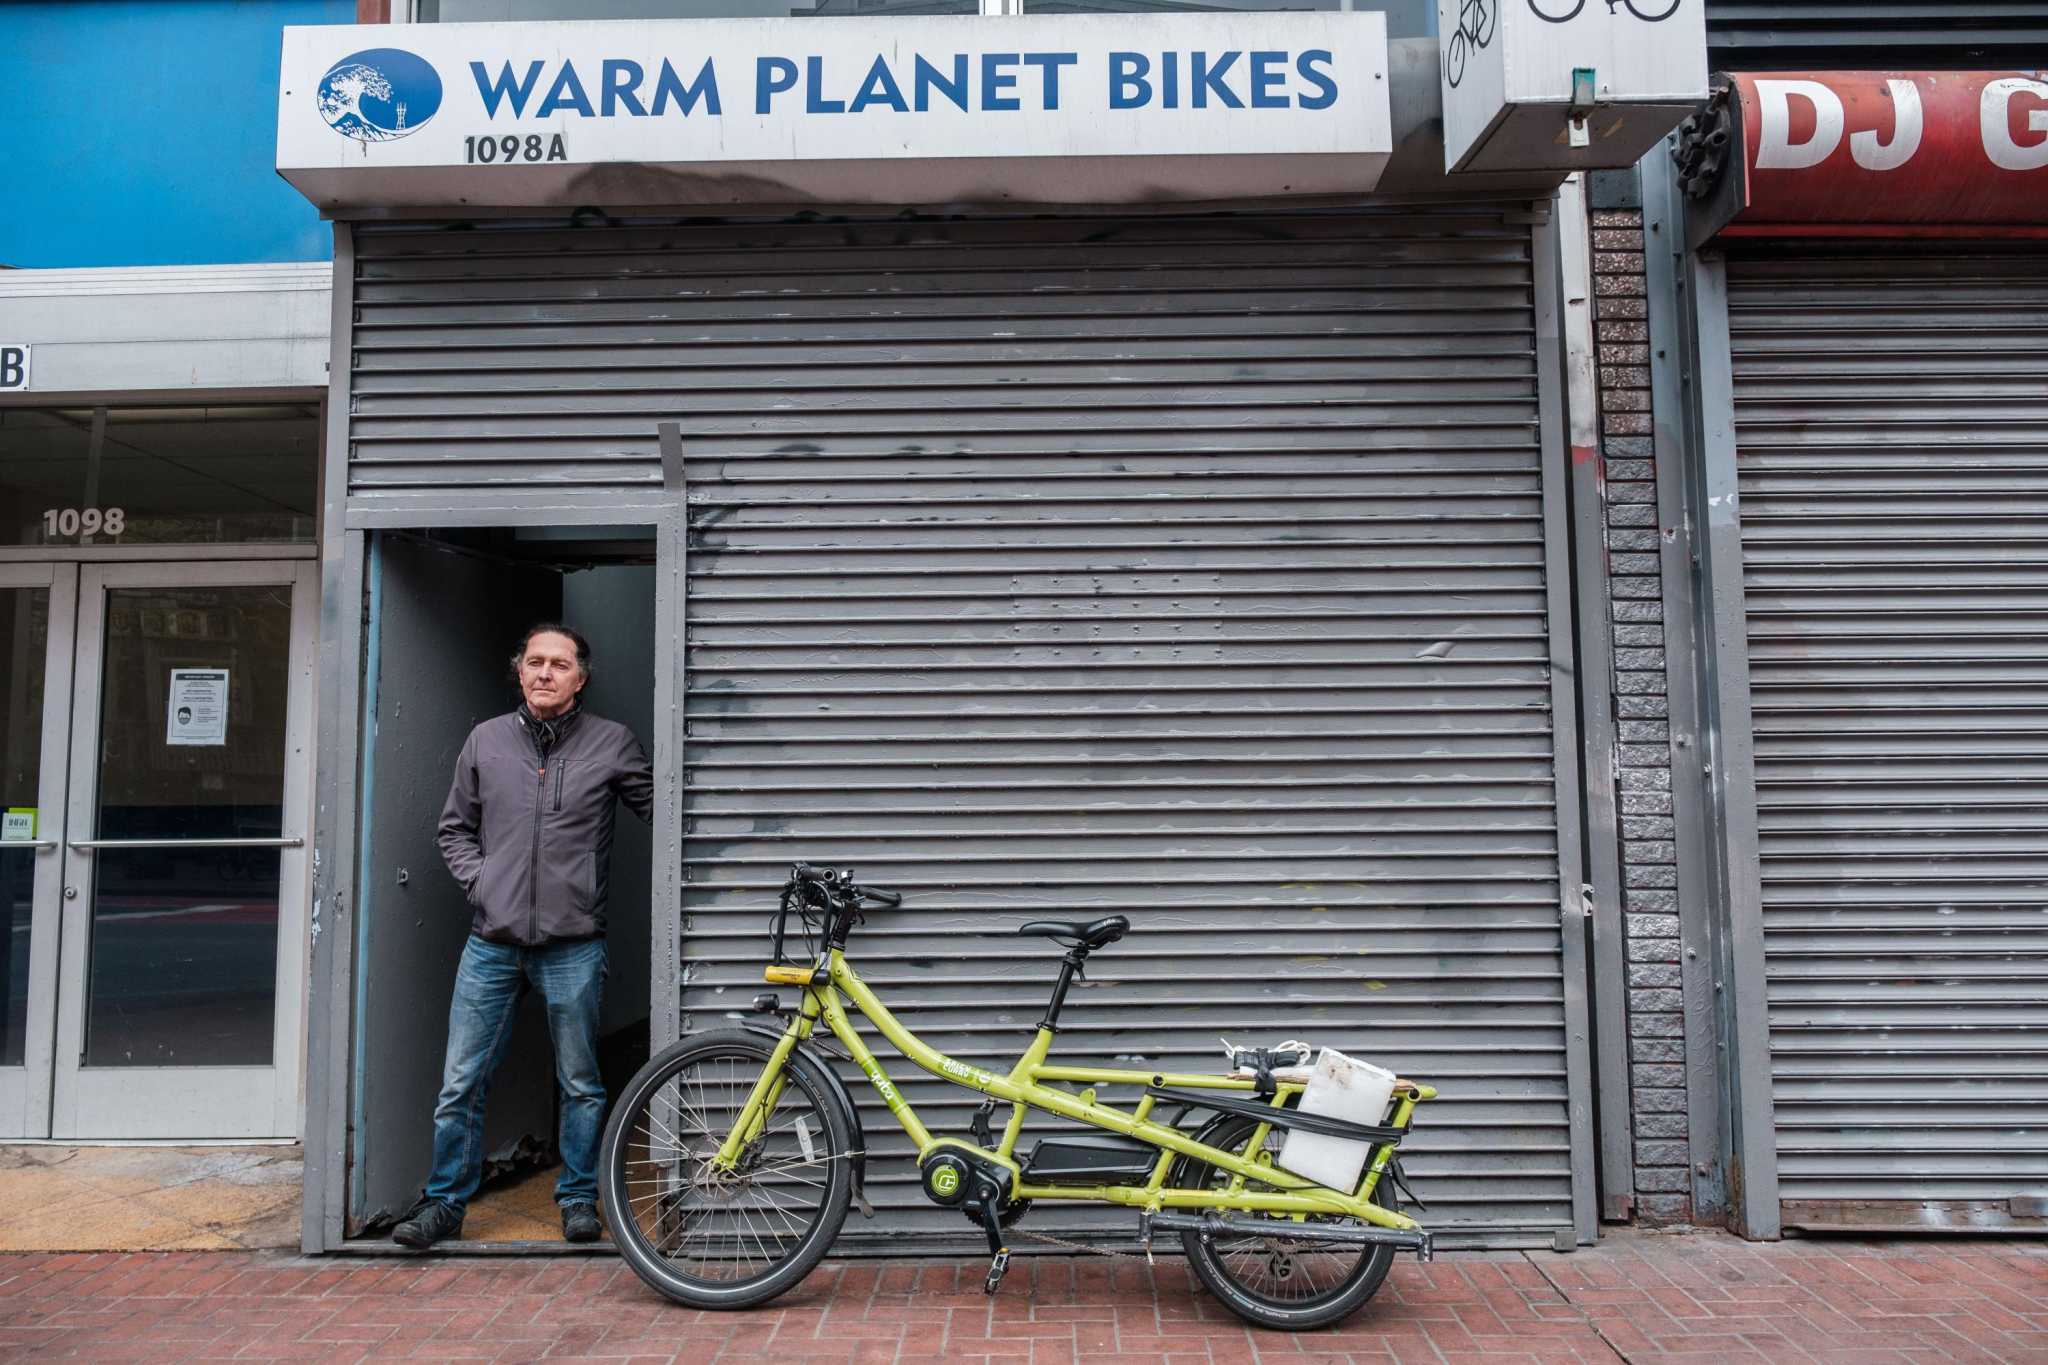 Soportar físicamente Elástico If I were 25, I wouldn't come to San Francisco': Yet, after thieves took  $100,000 of bikes, store owner says he's staying